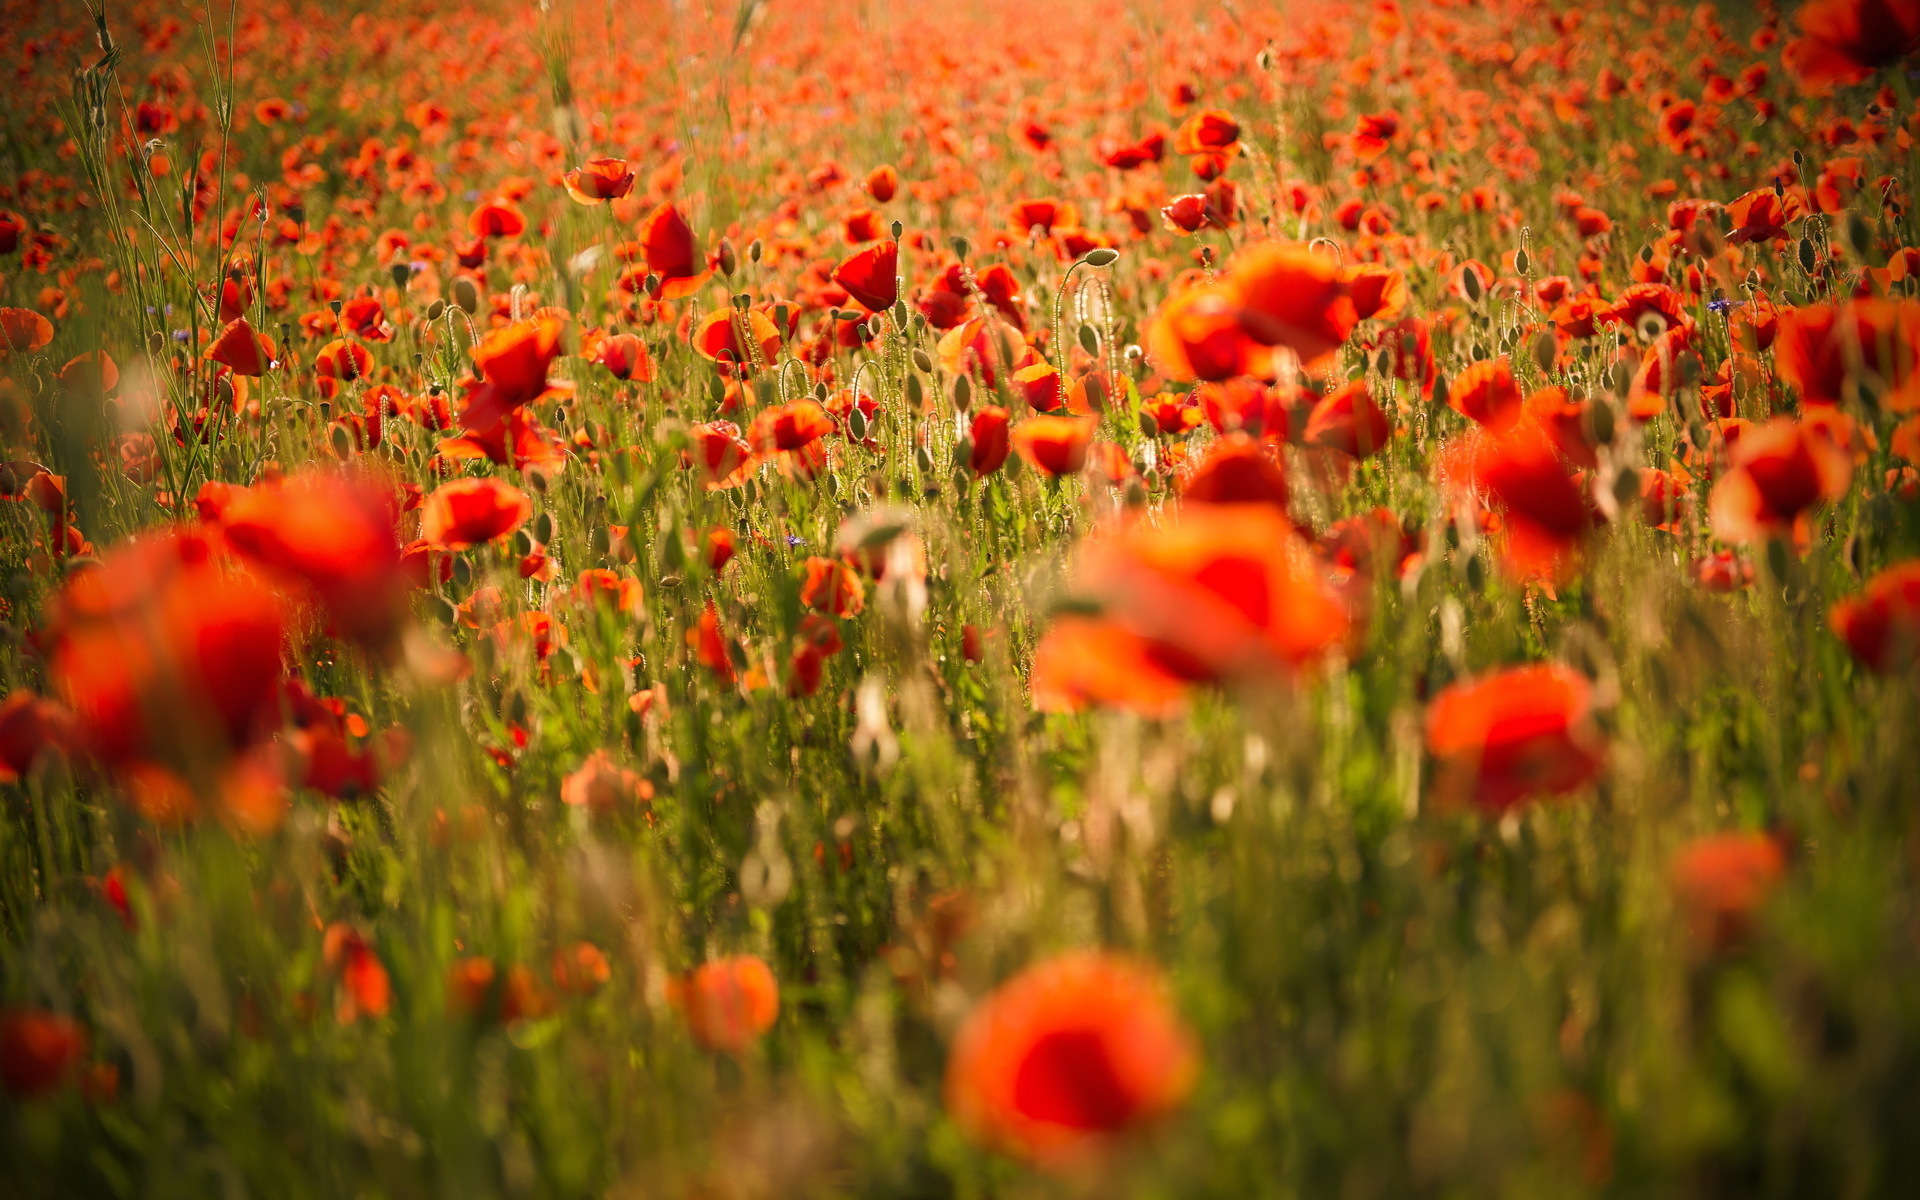 Field of red poppies wallpapers and images - wallpapers, pictures, photos